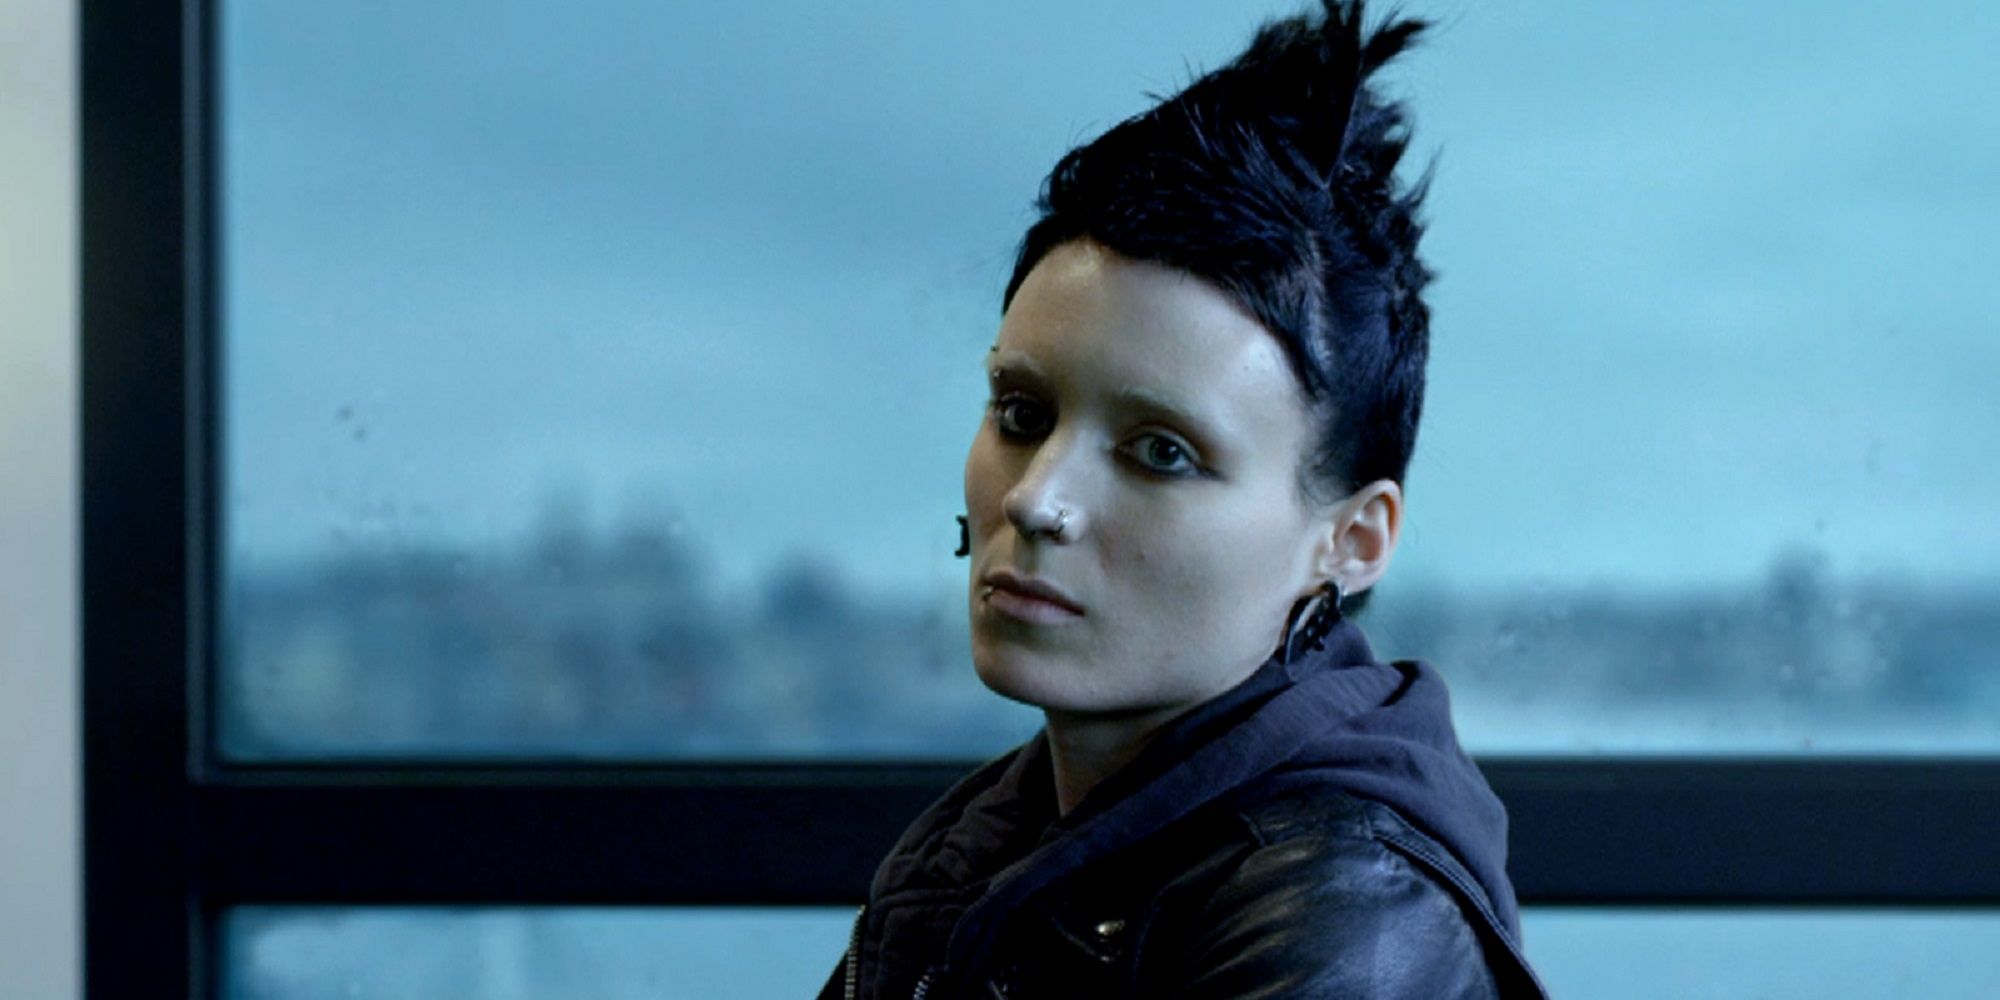 Lisbeth Salander looking serious in The Girl With the Dragon Tattoo